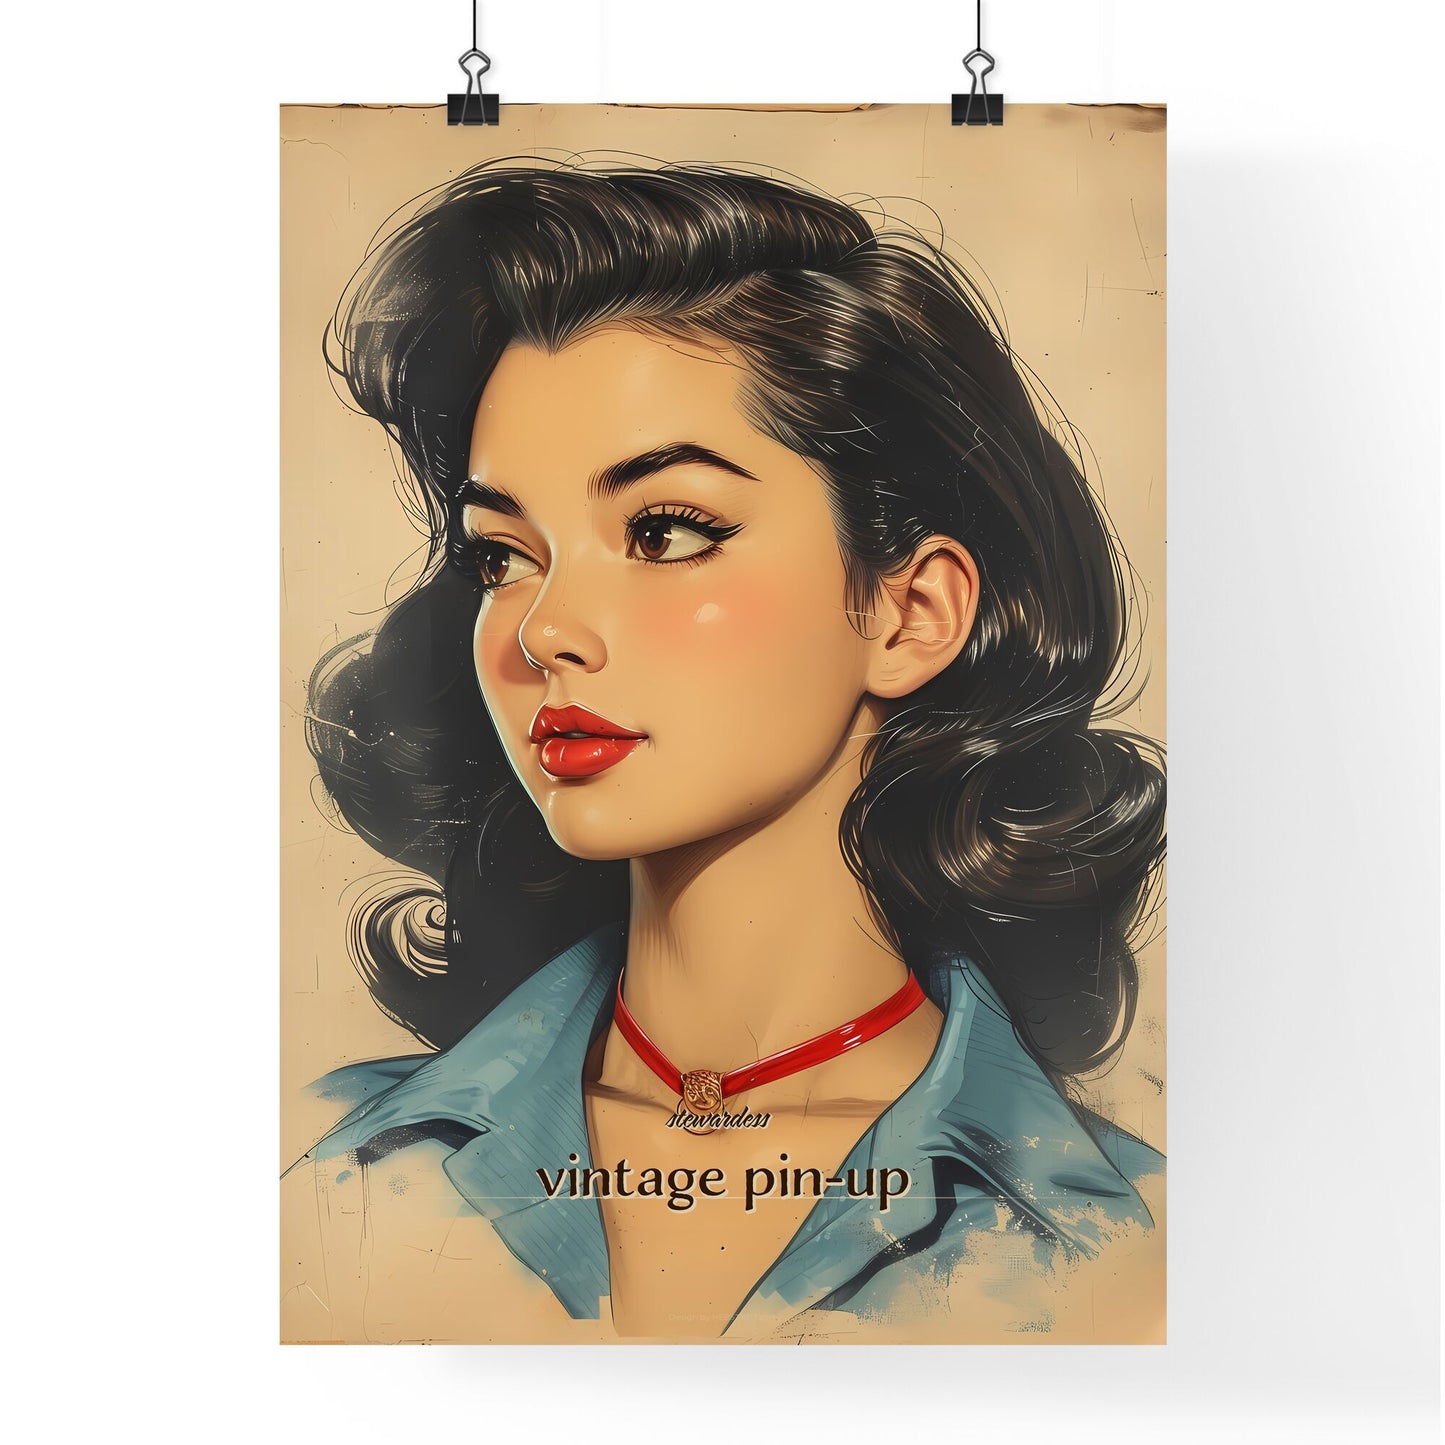 stewardess, vintage pin-up, A Poster of a woman with long black hair and red necklace Default Title